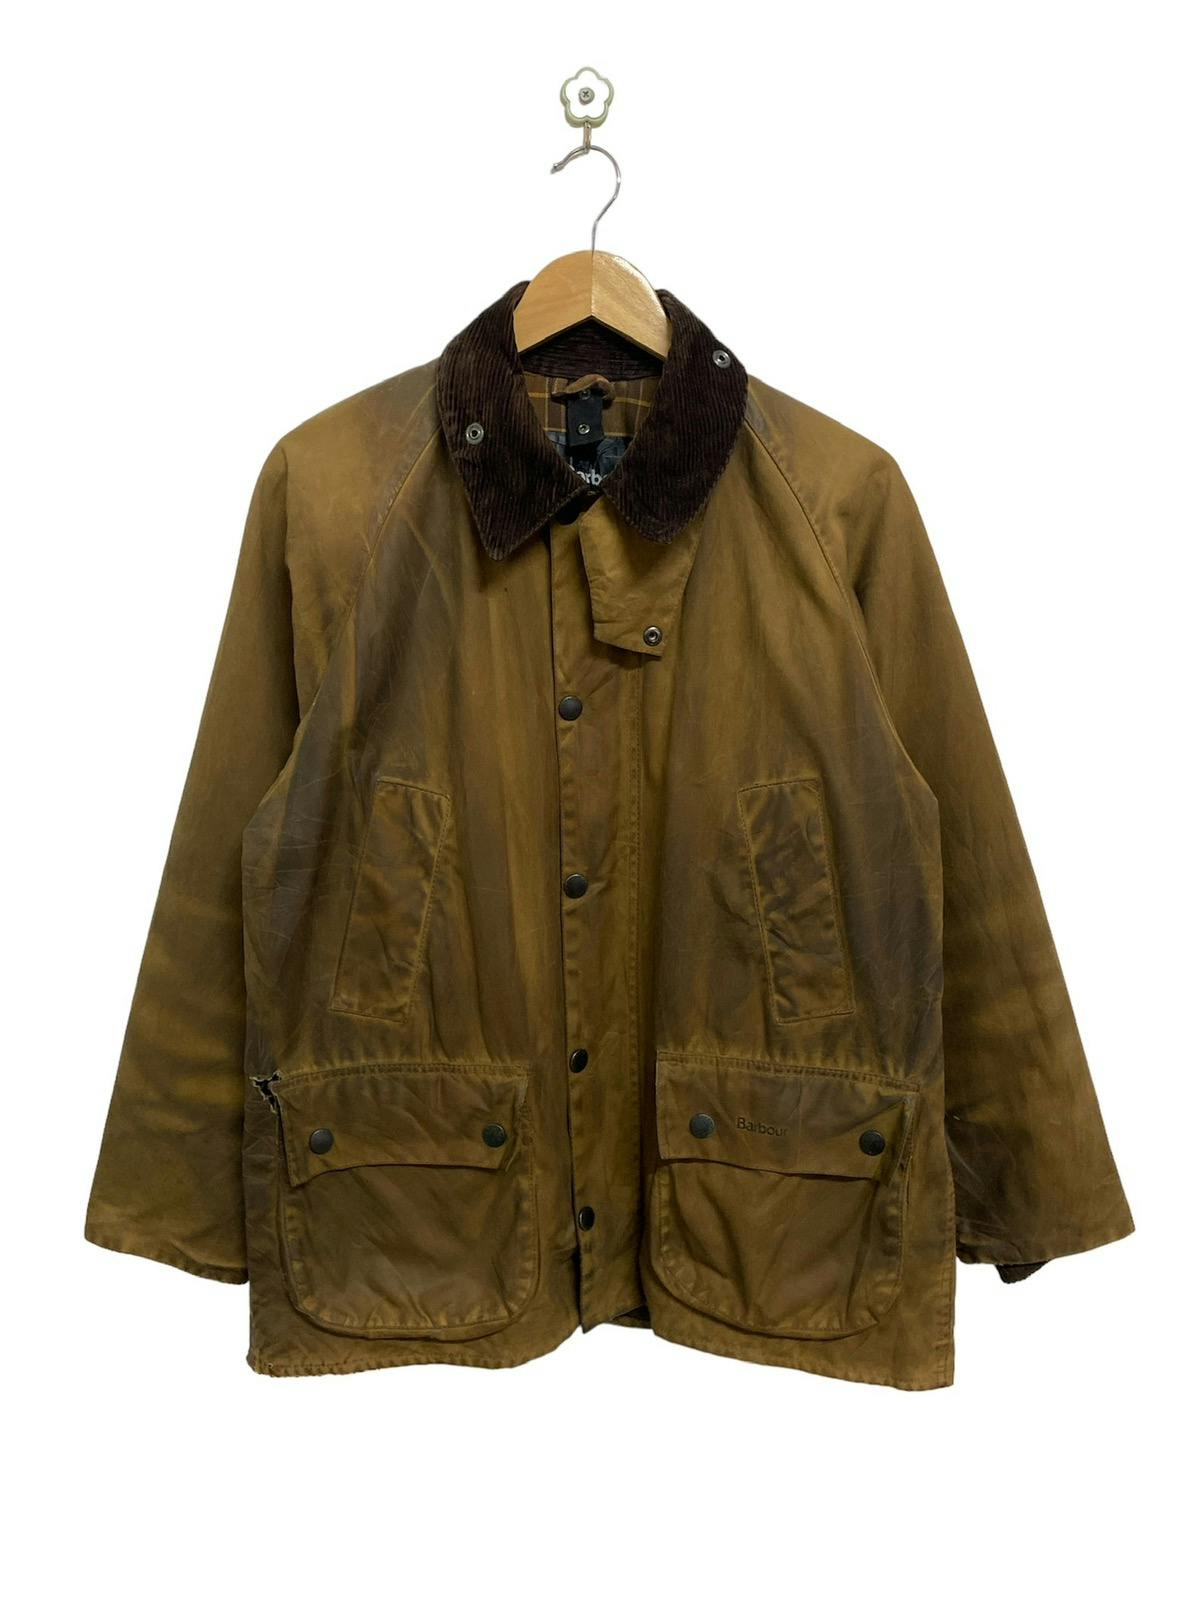 Barbour Classic Bedale Wax Jacket Made in England - 2